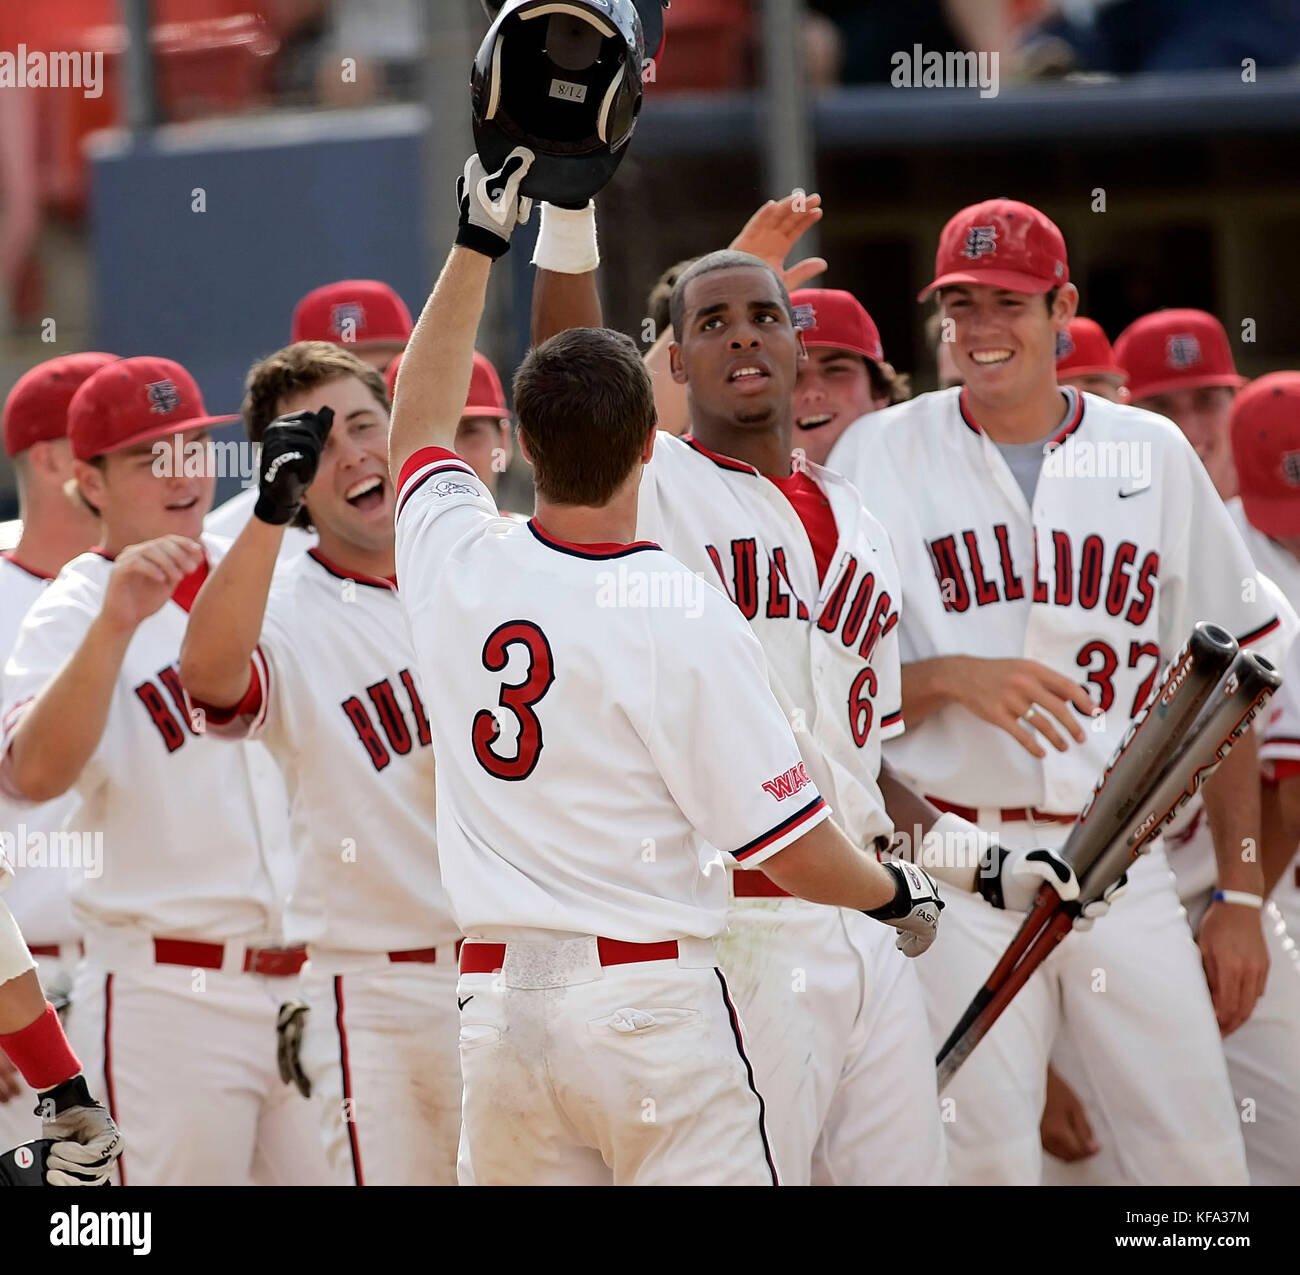 Fresno State's Eric Wetzel (3) celebrates with his teammates after hitting a home run off San Diego pitcher Josh Butler in the third inning of an NCAA Regional college baseball game in Fullerton, Calif. on Friday, June 2, 2006. Photo by Francis Specker Stock Photo